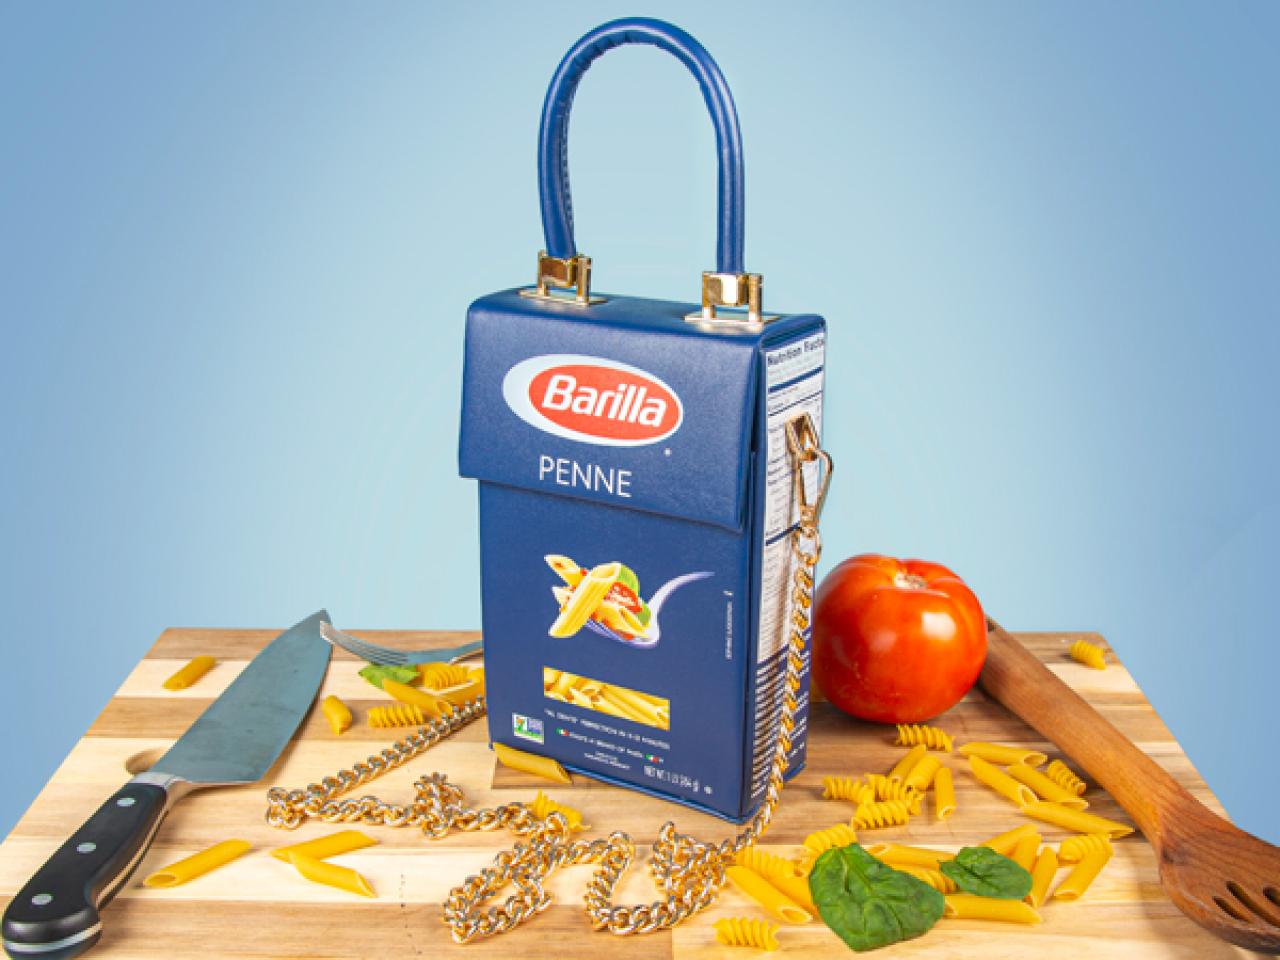 Recipes | - Best Trends, Food FN to Barilla Purse : the | Food Box Behind-the-Scenes, Pasta Network and Penne Network Food Where Get Dish